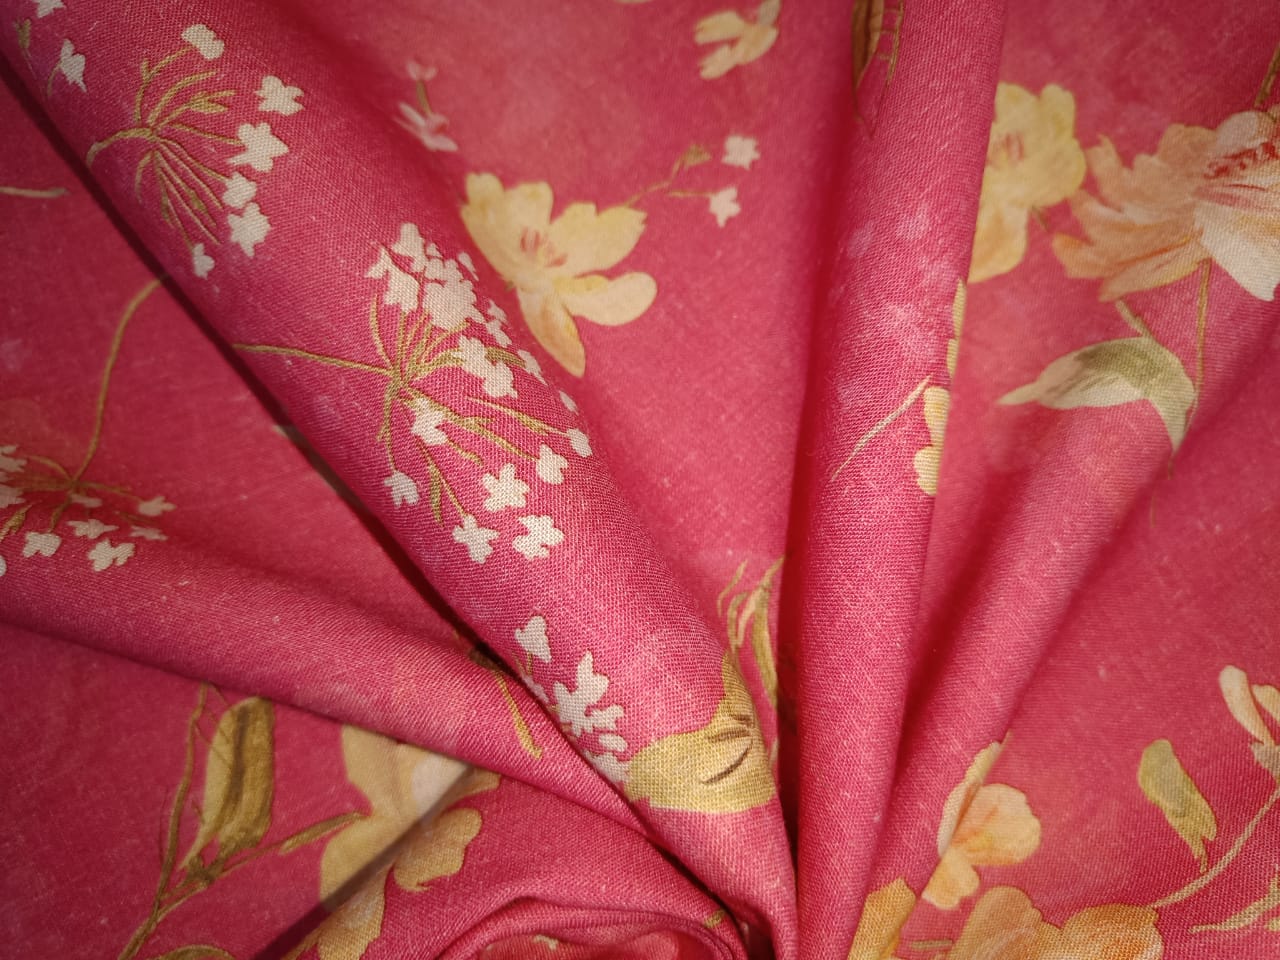 100% linen Floral  print 44" wide available in Beige brown, Watermelon pink, Yellow, Green [15410-15412]